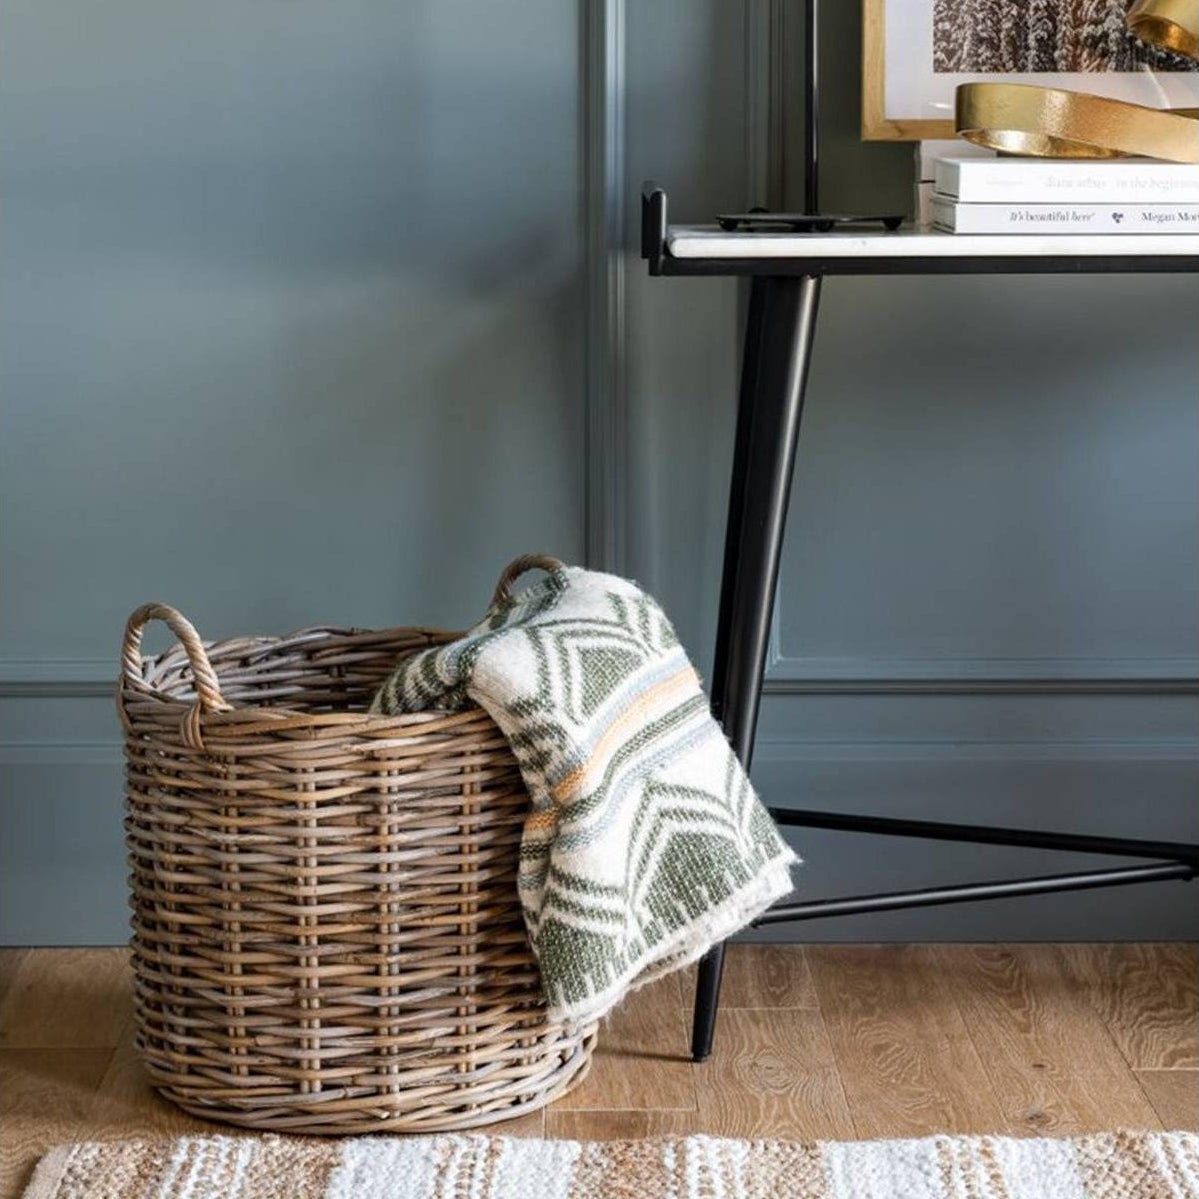 brown/gray round rattan basket on the floor with blanket inside